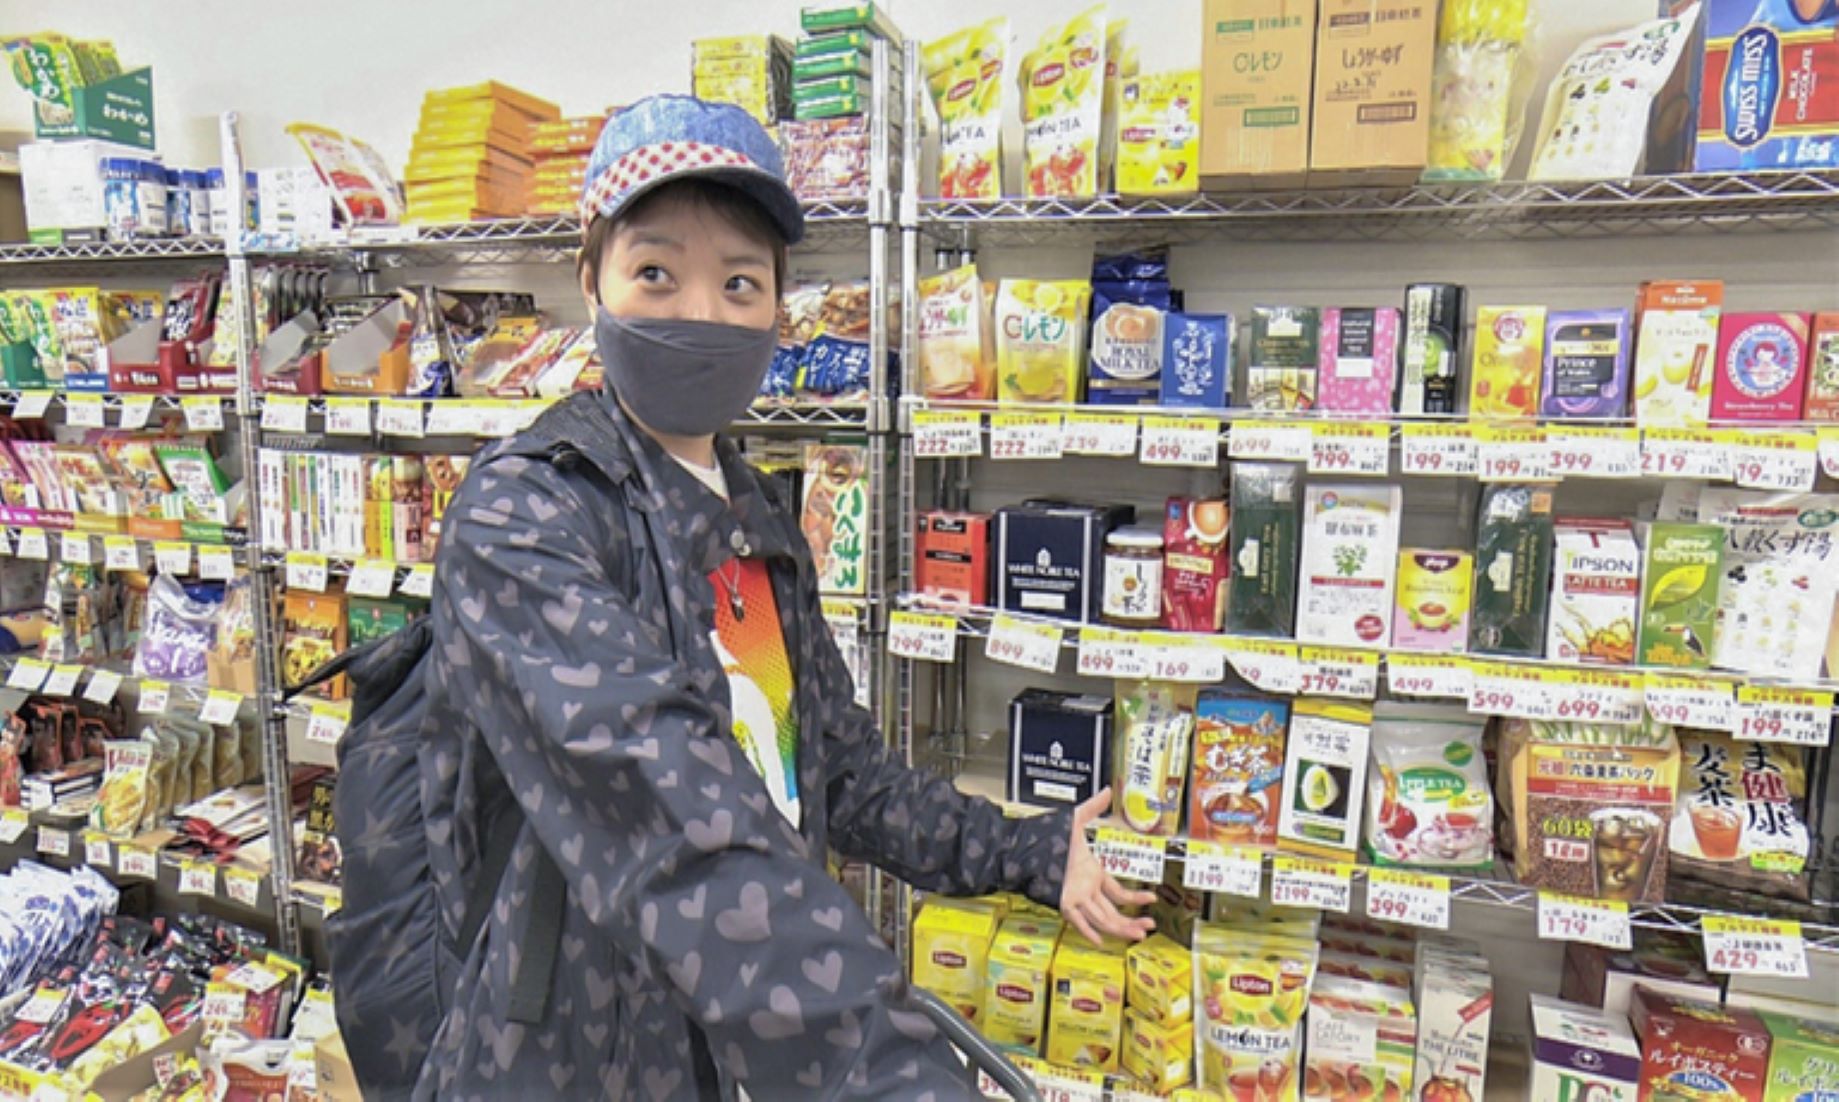 Japan’s Convenience Stores To Offer Lower Priced Items Amid Cost Of Living Crisis